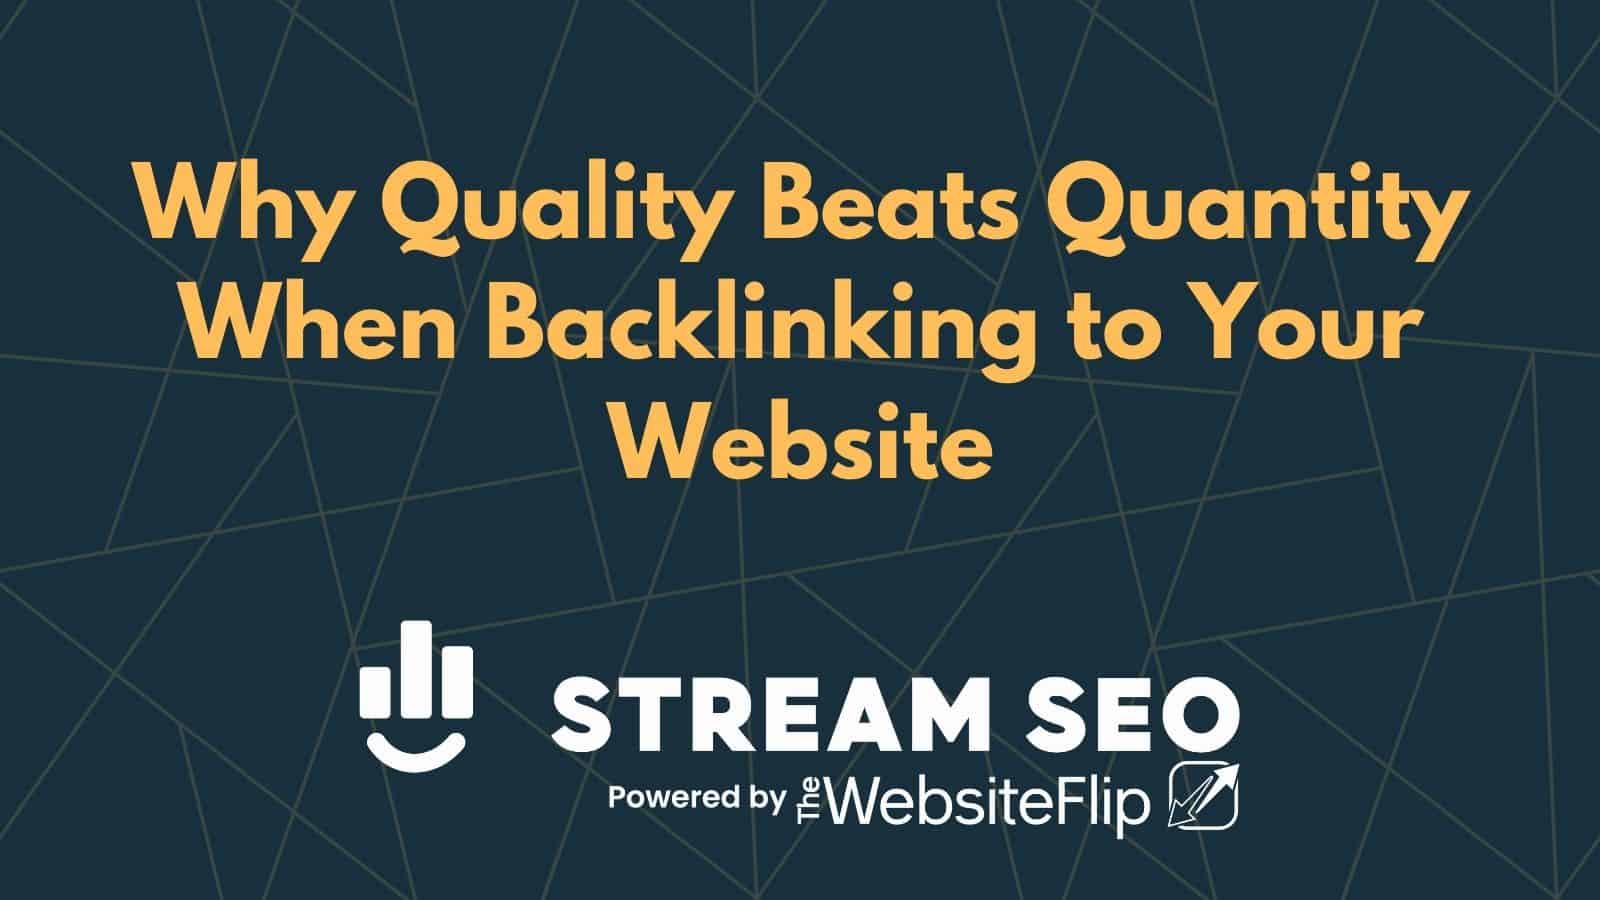 Why Quality Beats Quantity When Backlinking to Your Website